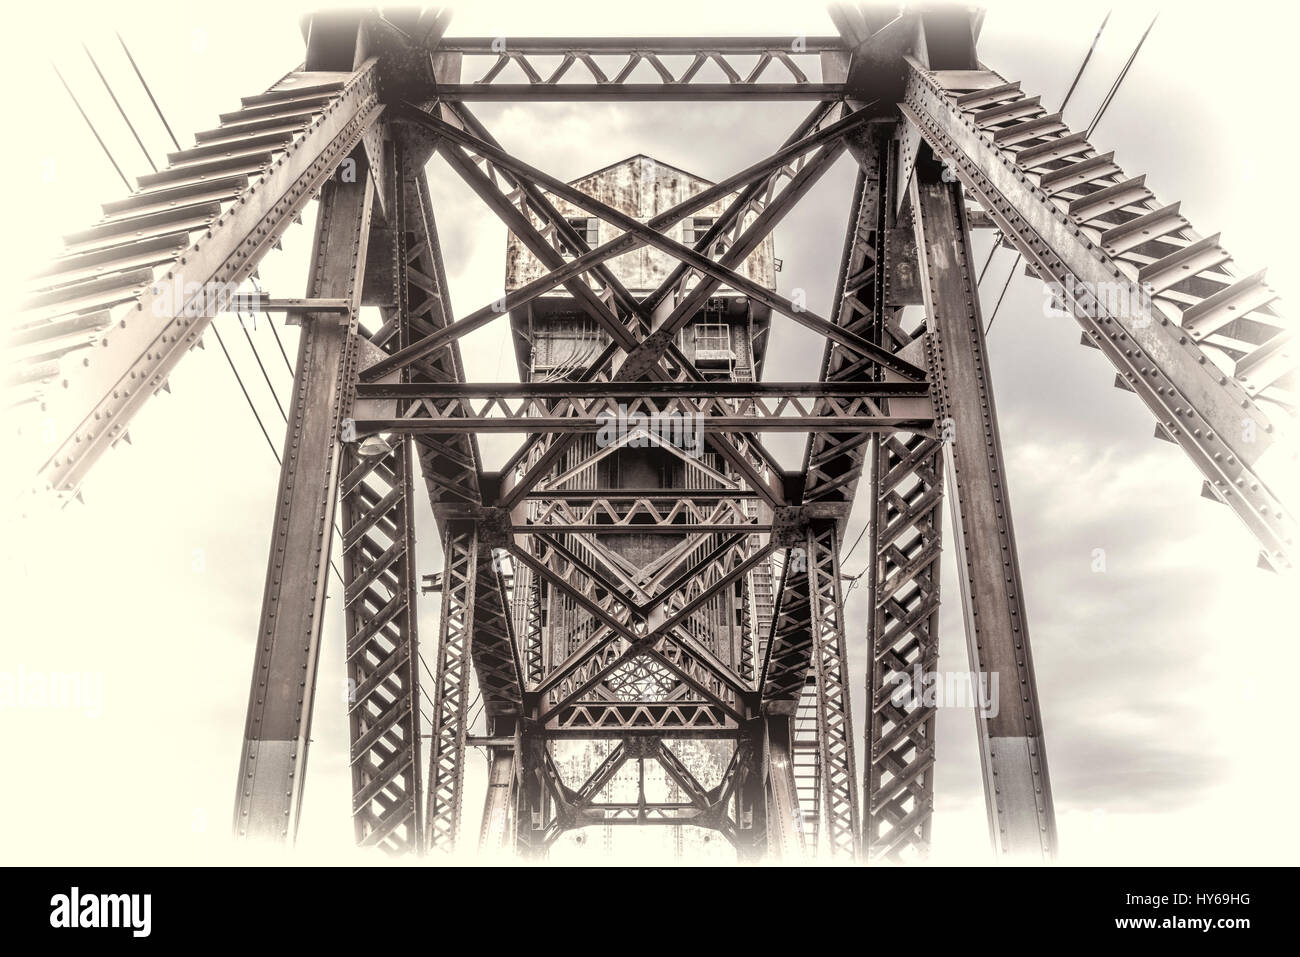 A detail of historic railroad Katy Bridge  over Missouri River at Boonville with a lifted midsection, retro opalotype processing Stock Photo